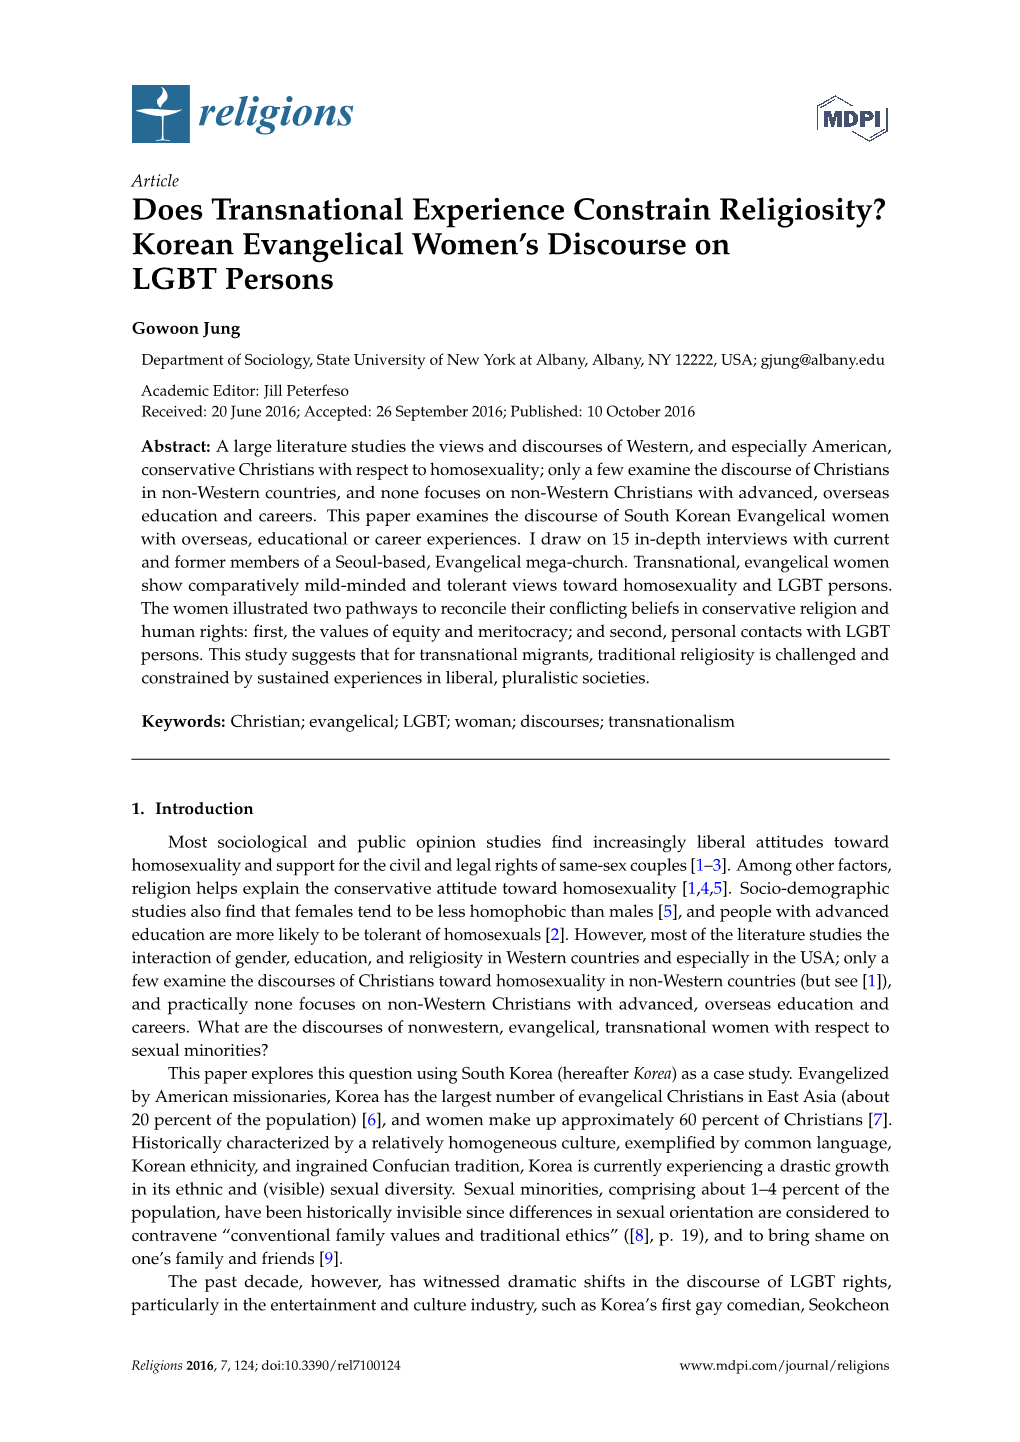 Does Transnational Experience Constrain Religiosity? Korean Evangelical Women's Discourse on LGBT Persons